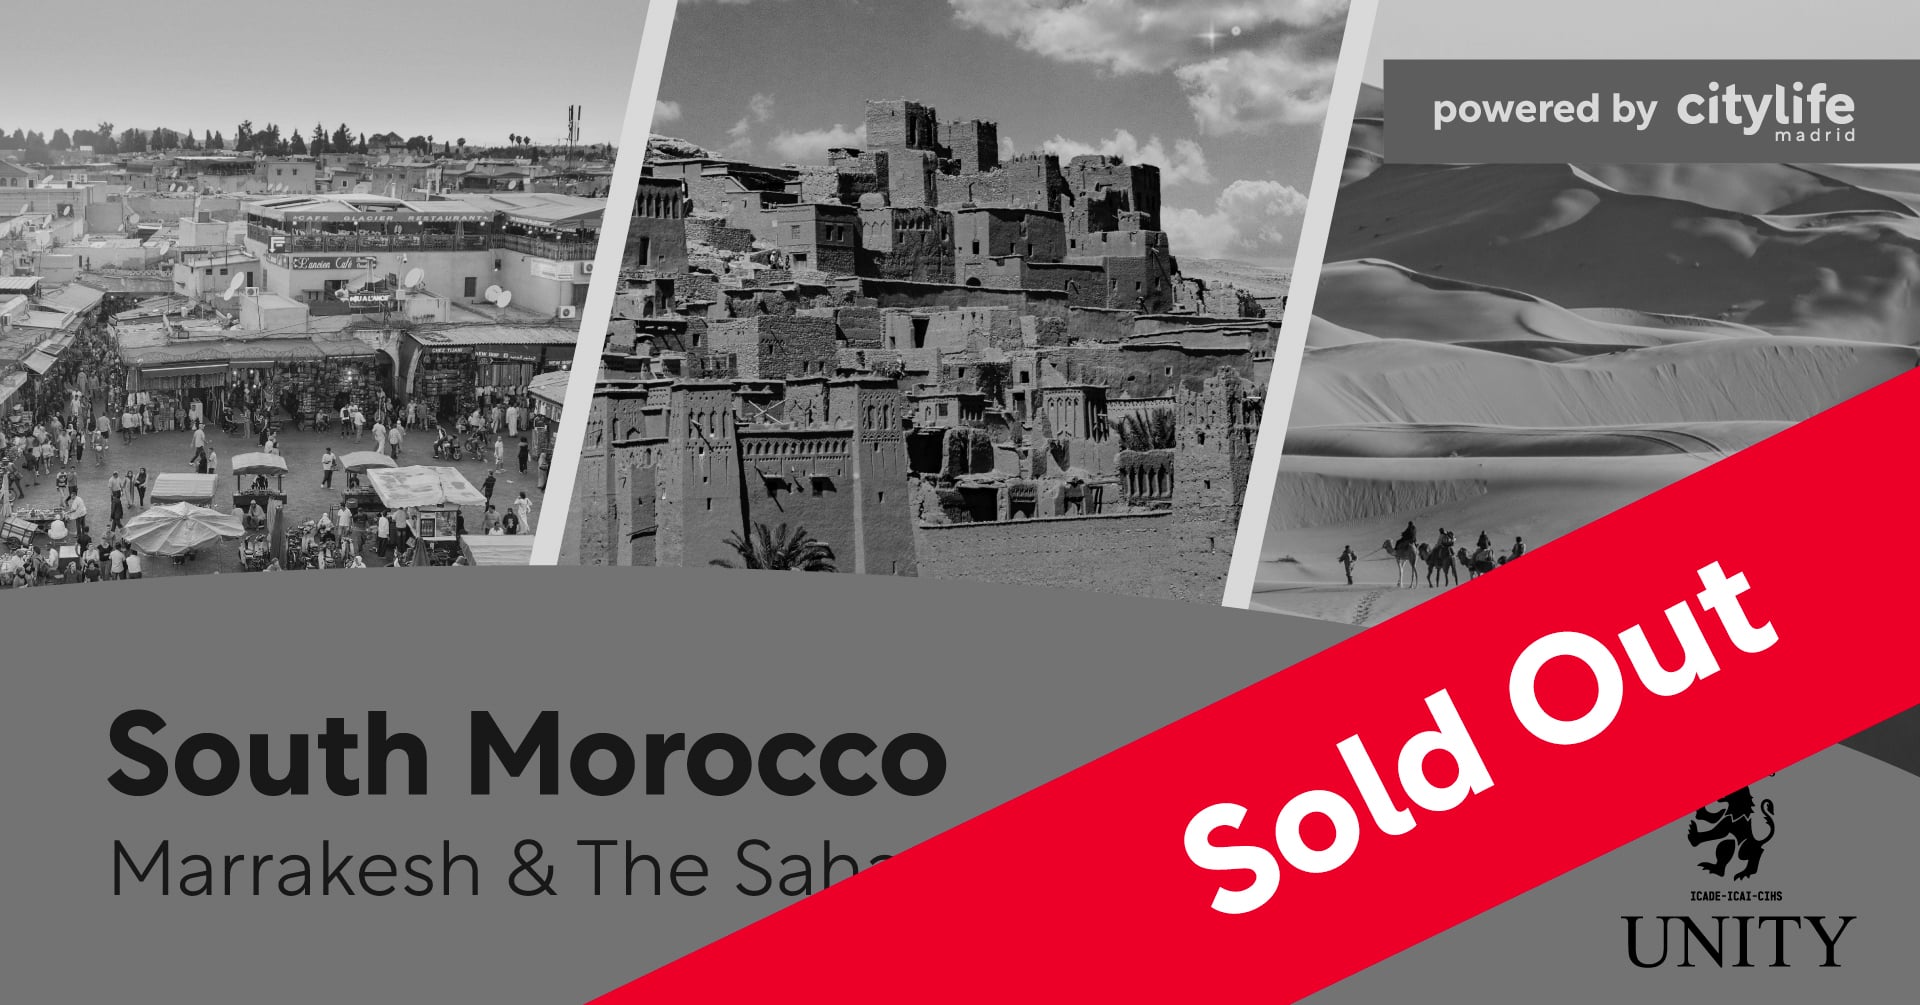 sold-out-citylife-madrid-trips-south-morocco-unity-fb-event